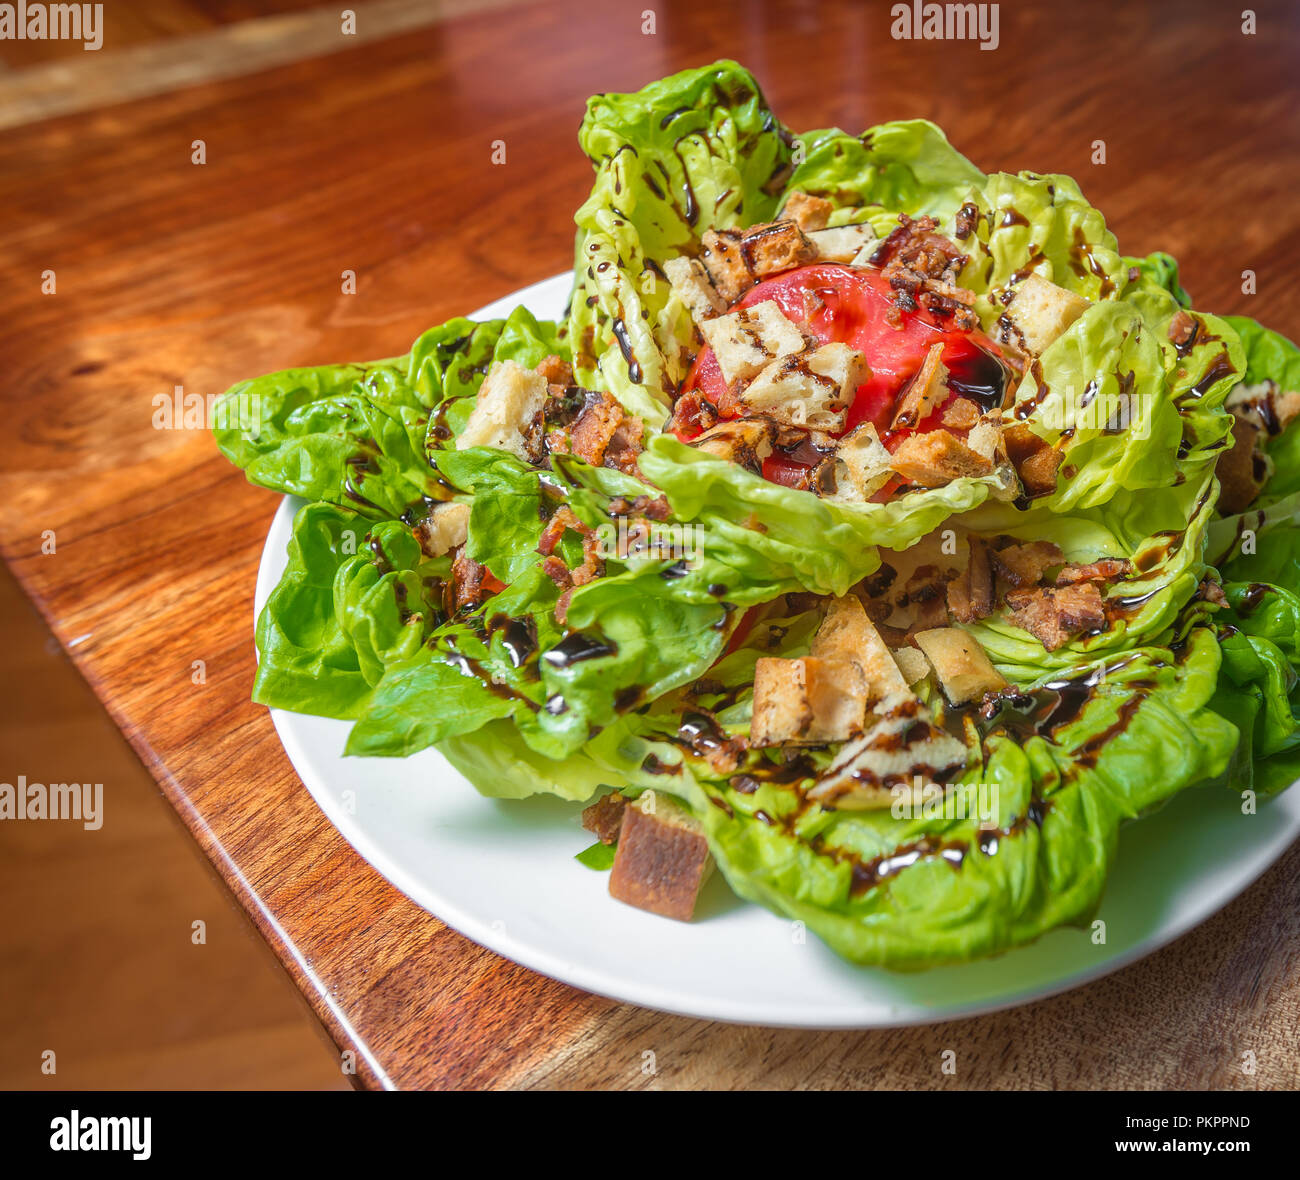 A BLT salad with bacon, tomatoes, and croutons on a wooden table Stock Photo